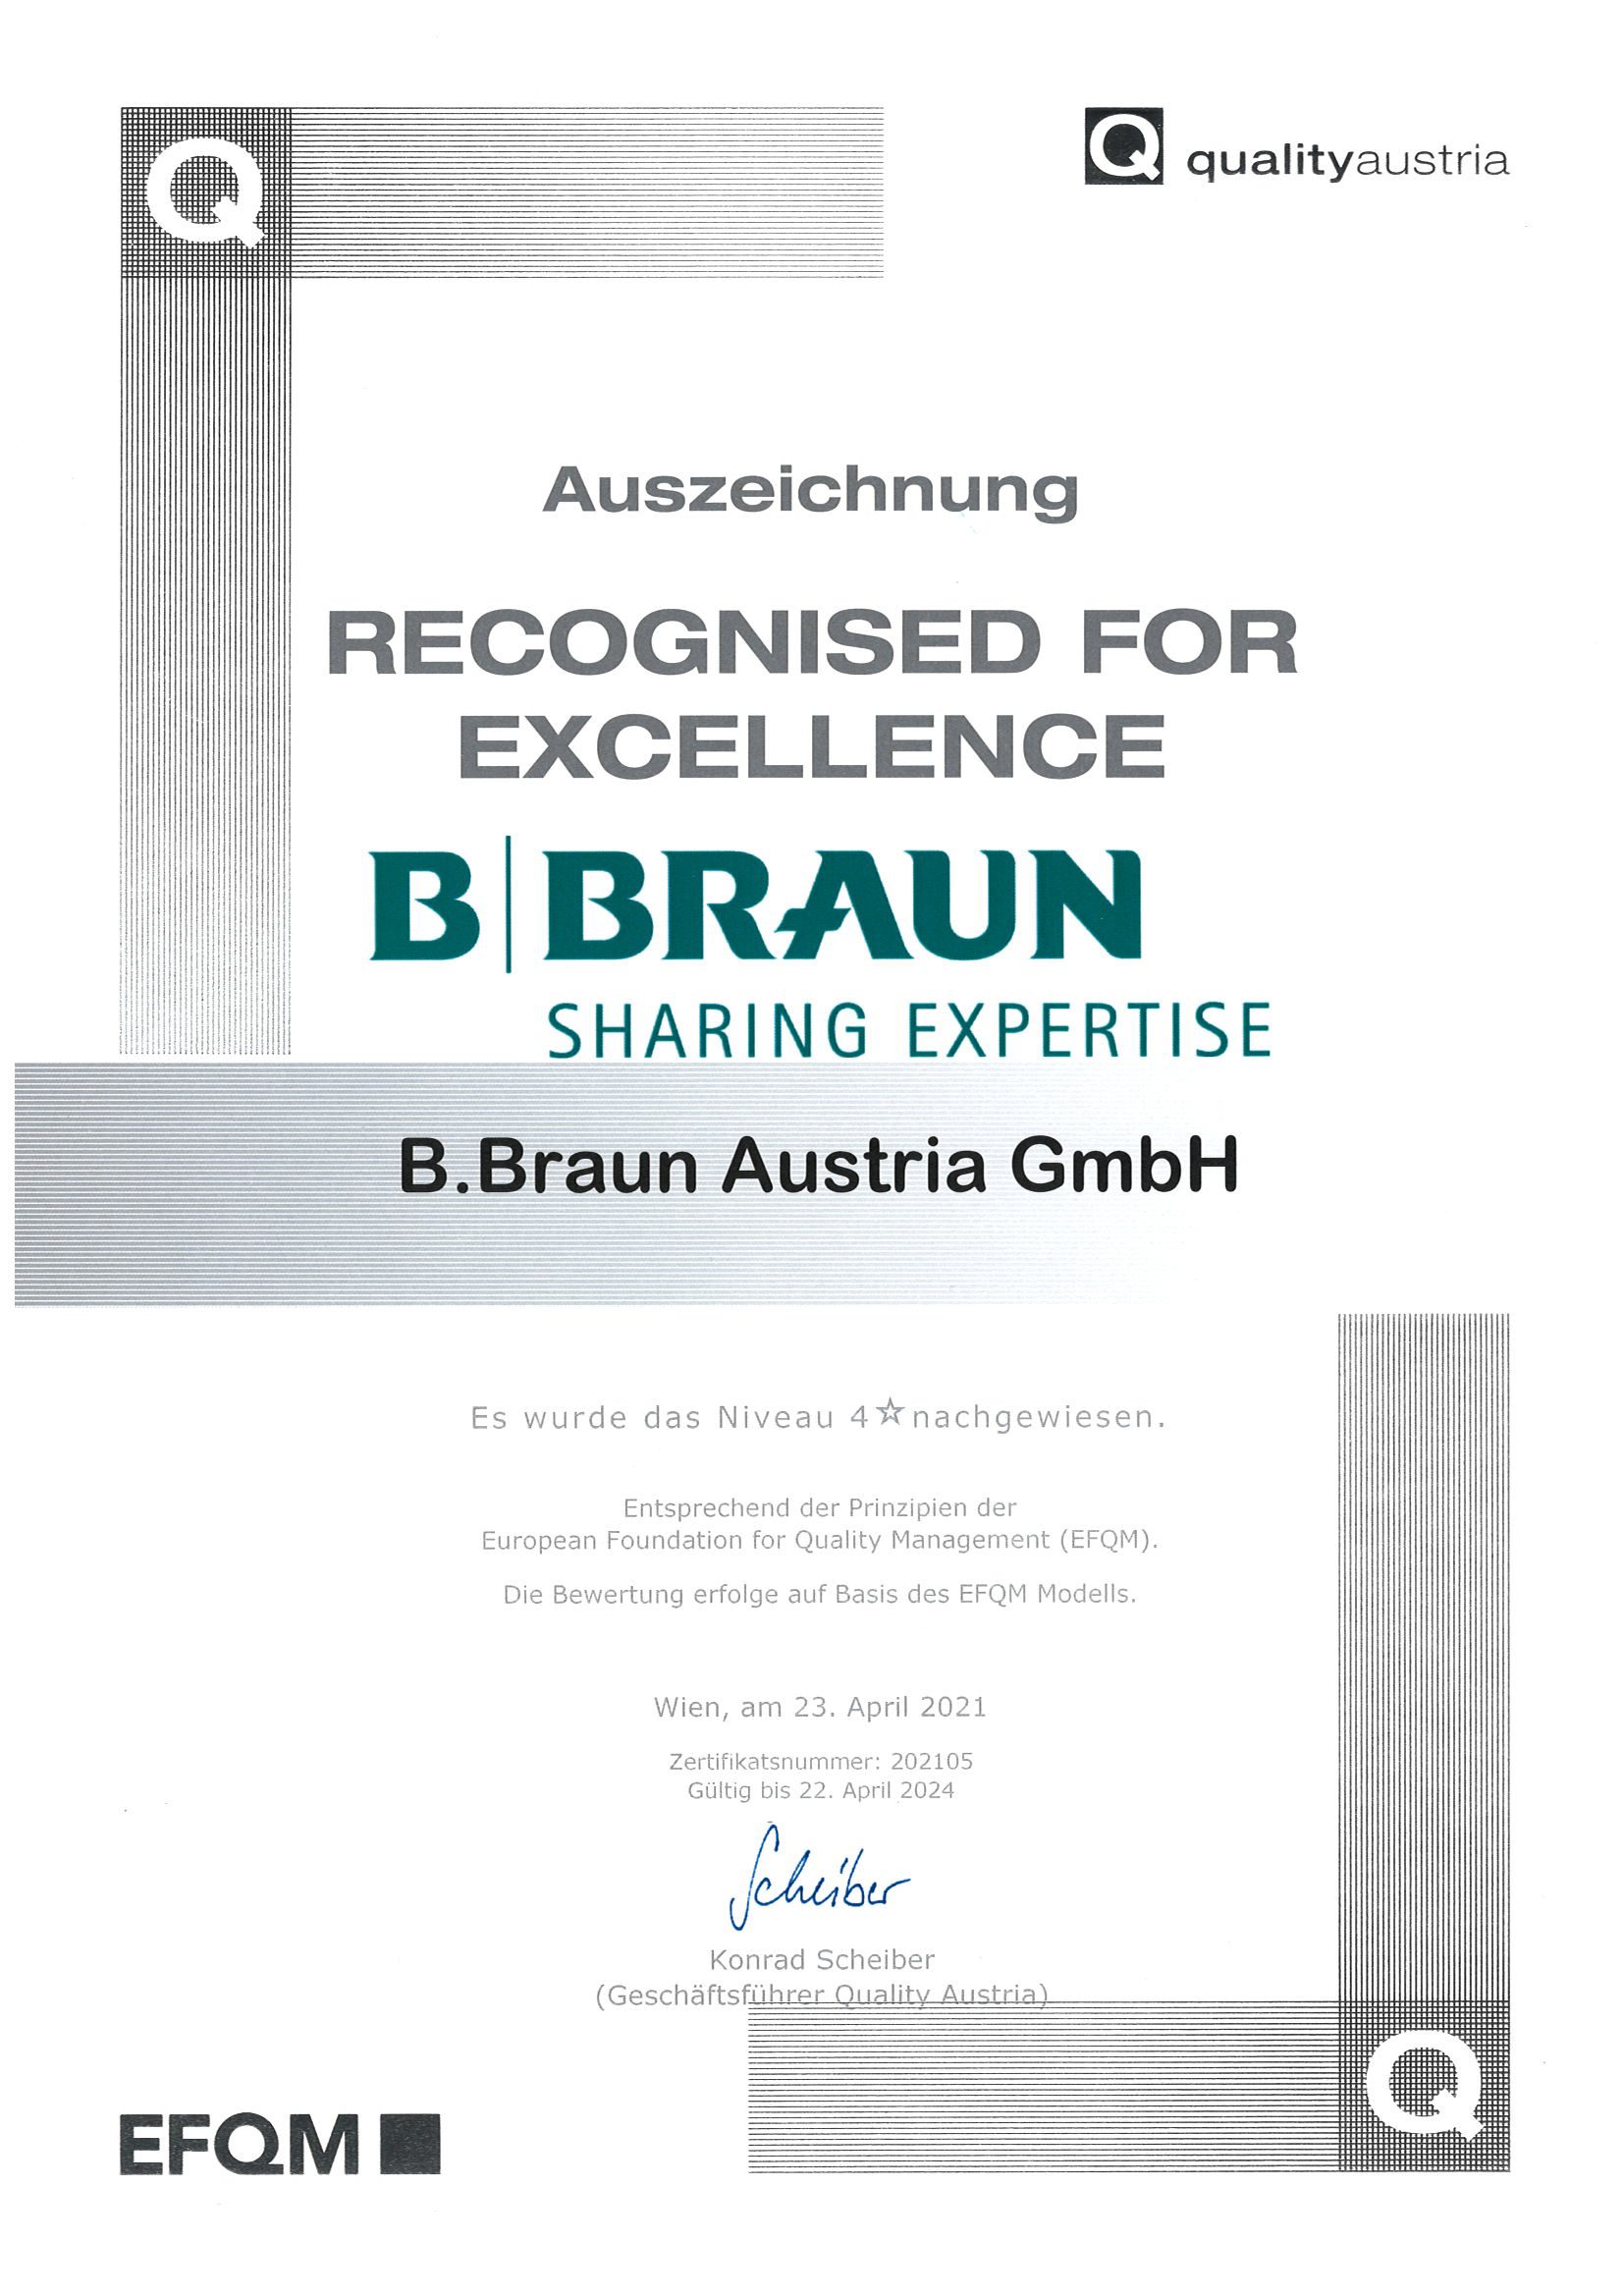 B. Braun Austria - Recognised for Excellence